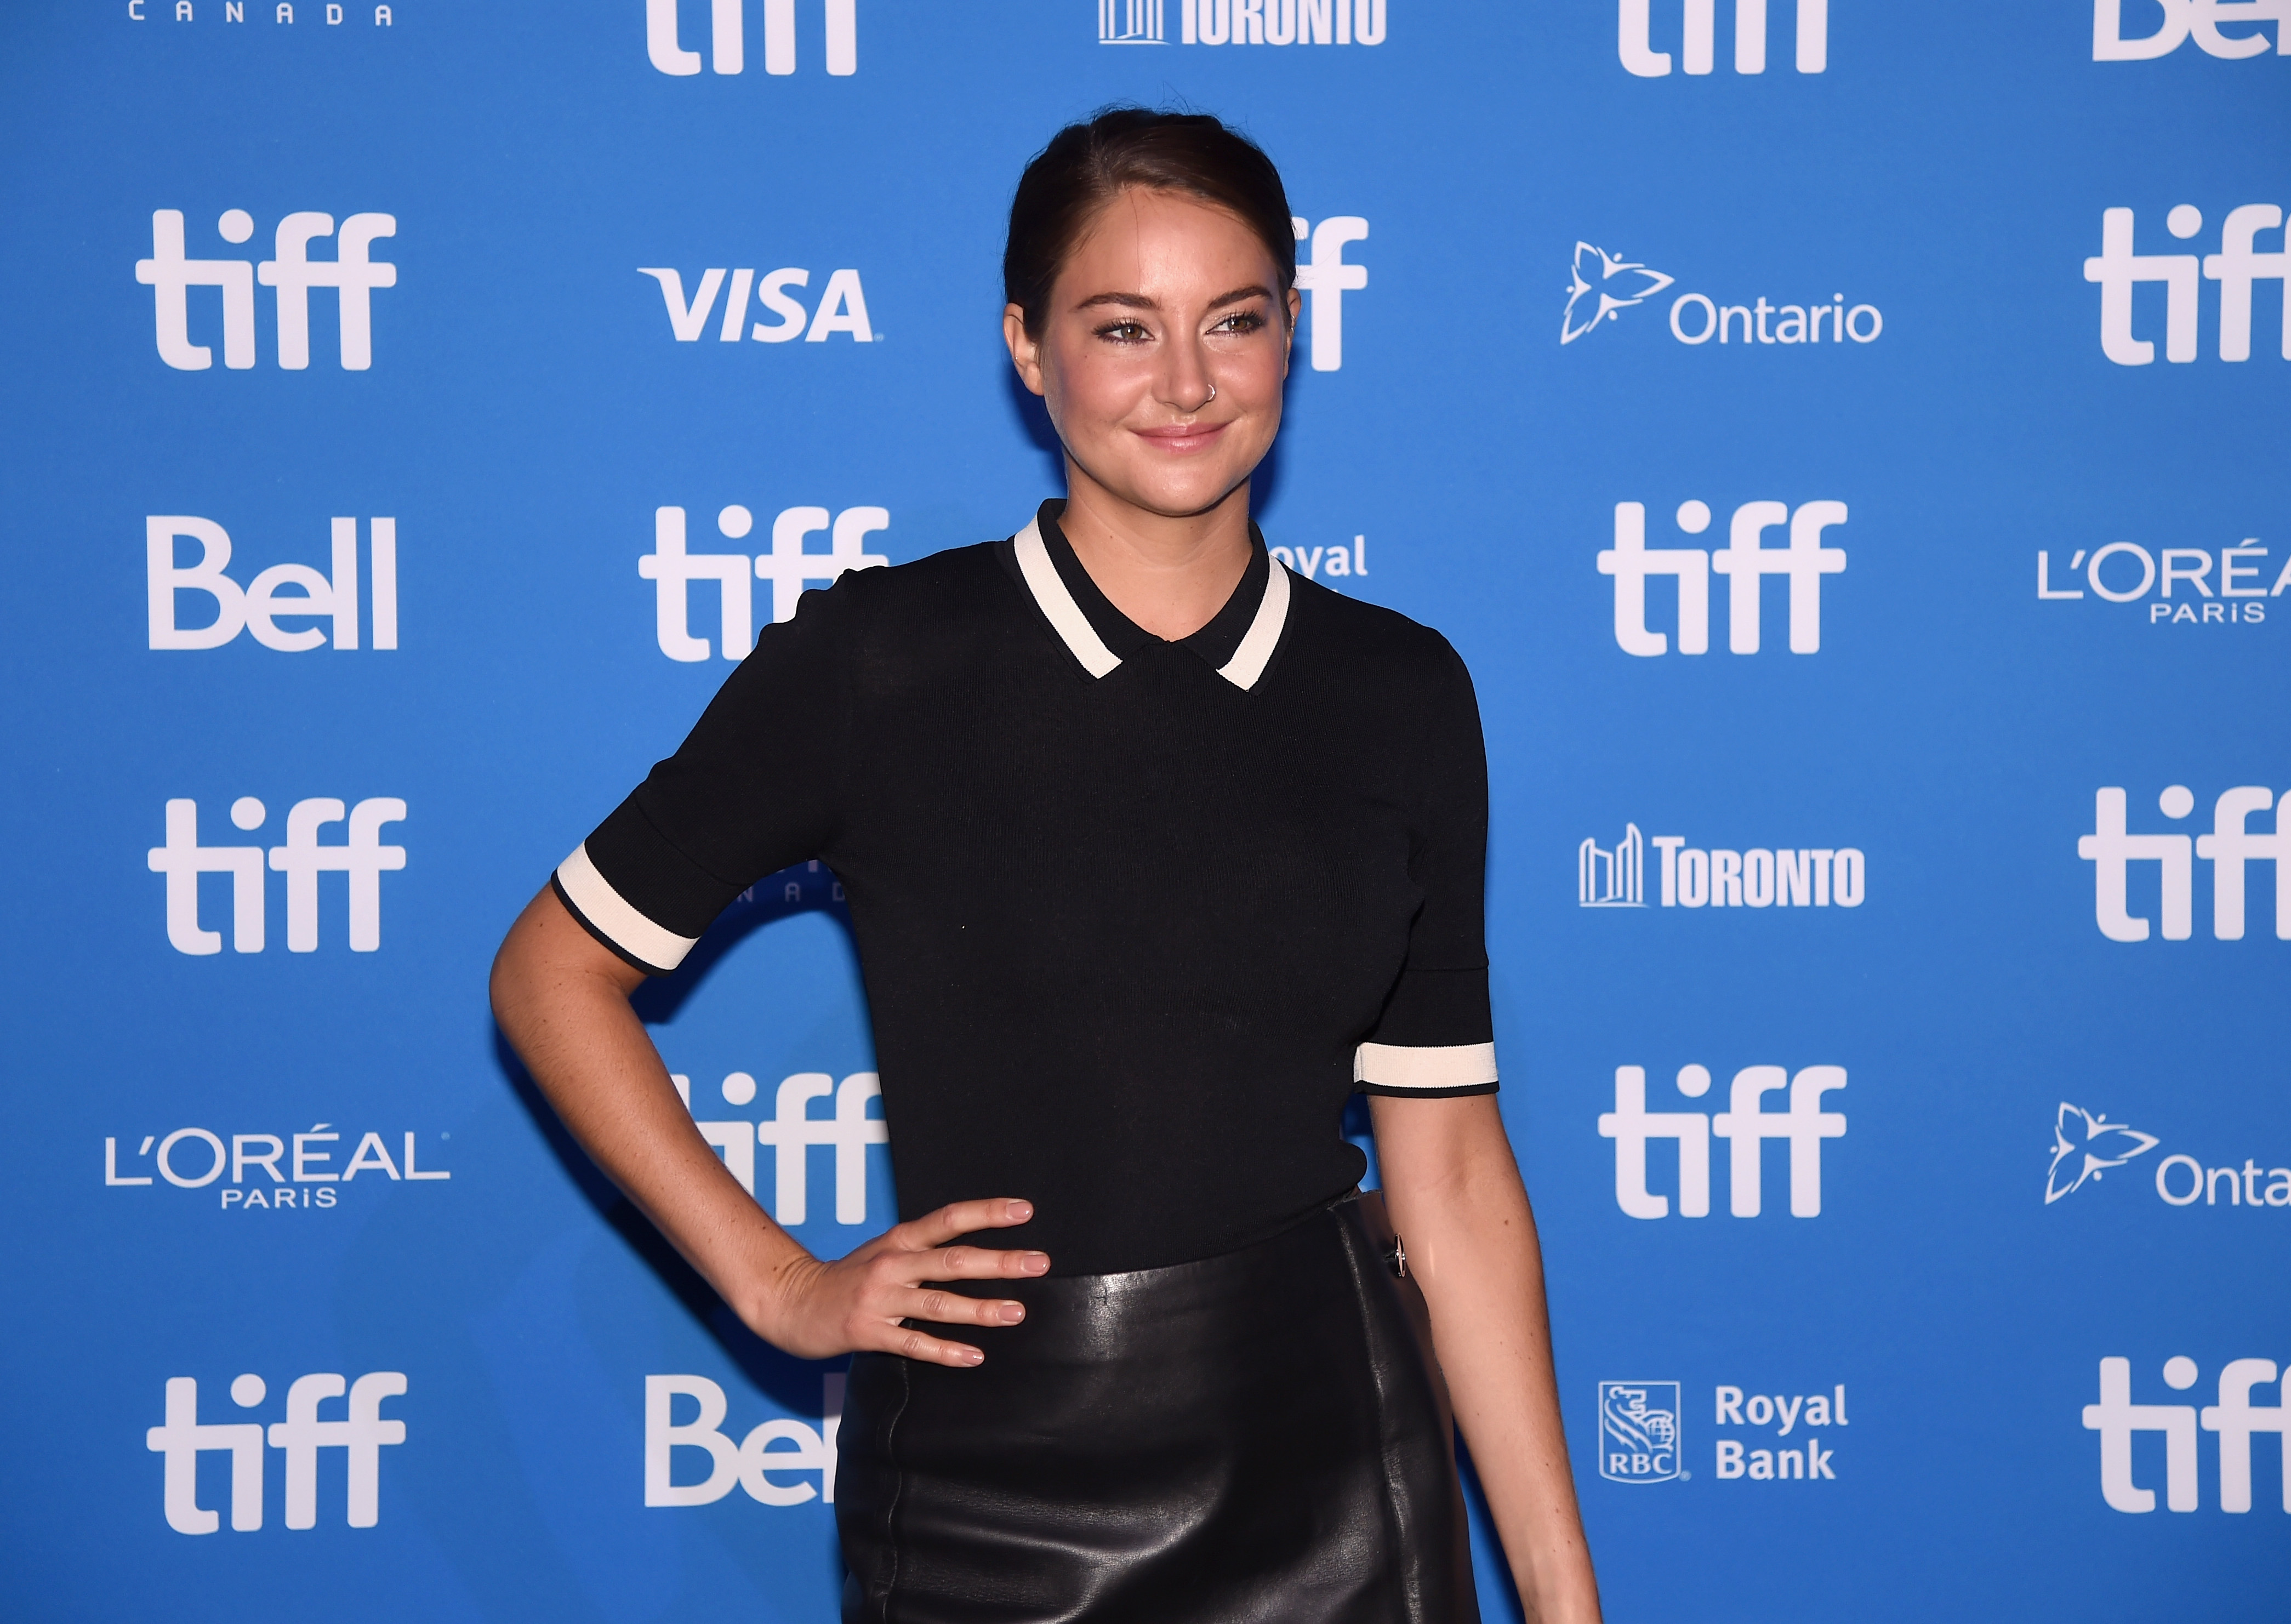 Actress Shailene Woodley attends "Snowden" press conference during the 2016 Toronto International Film Festival at TIFF Bell Lightbox in Toronto on Sept. 10, 2016 .